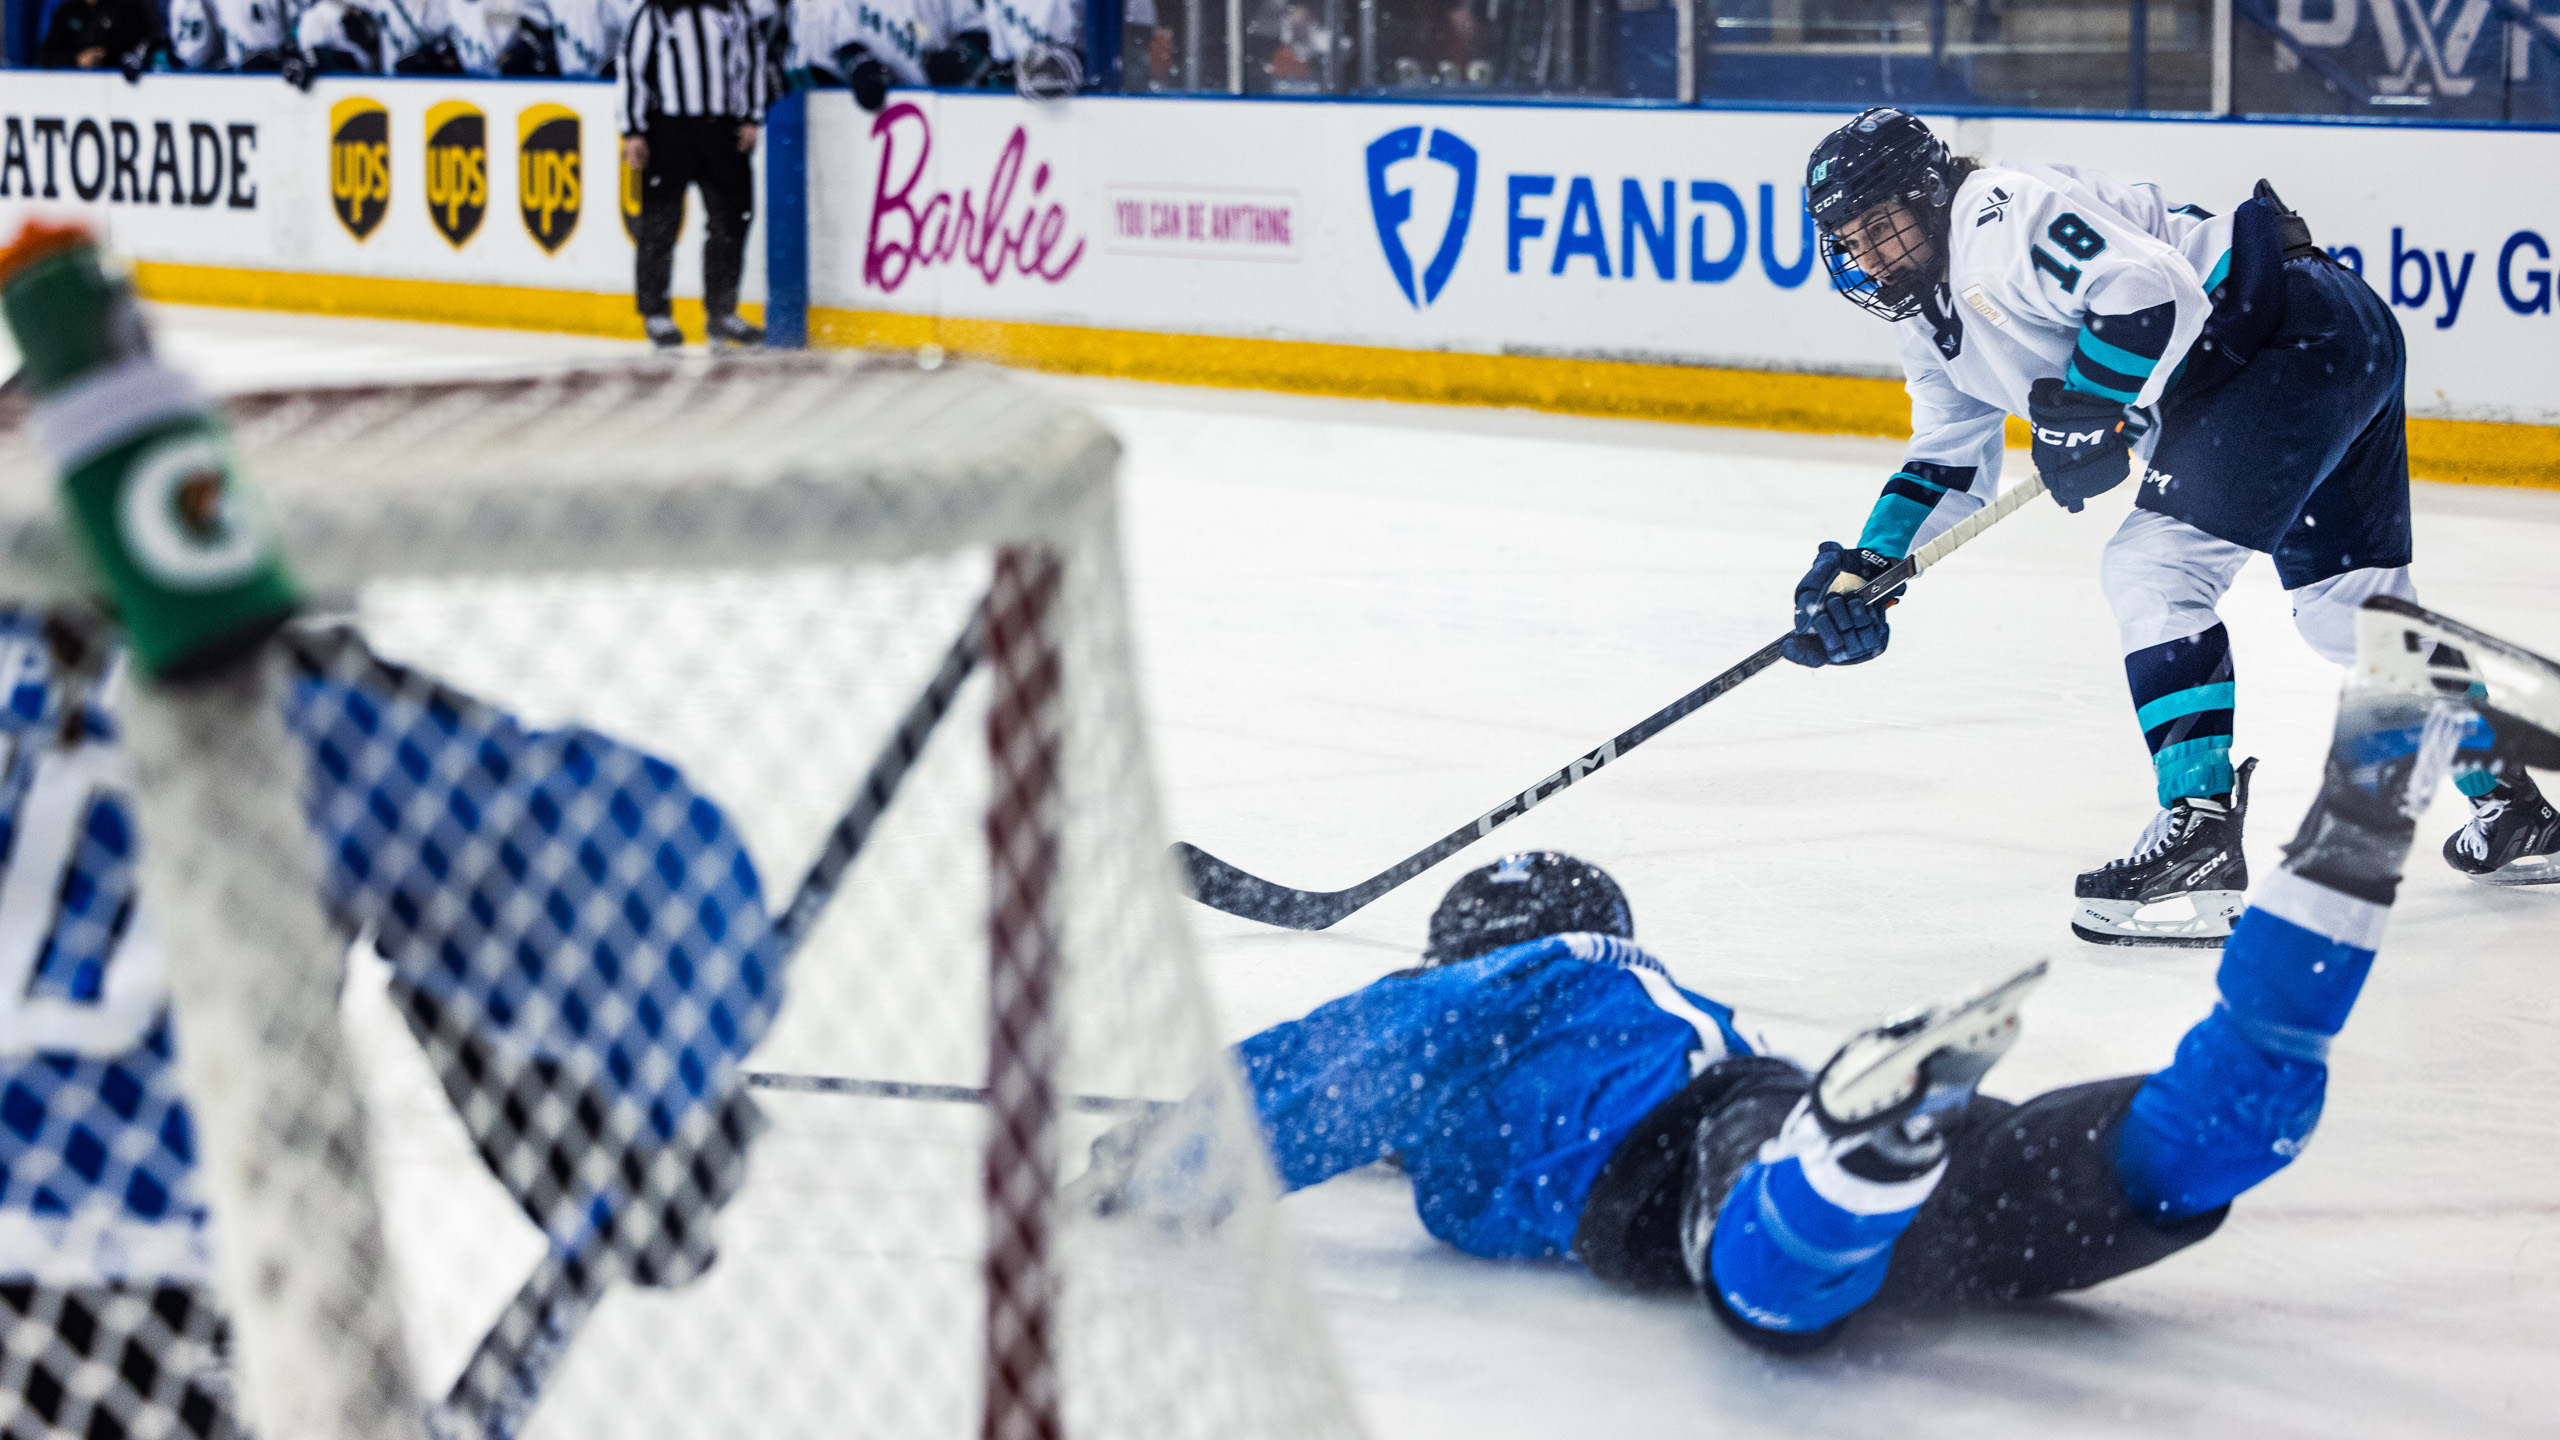 A PWHL New York player prepares to shoot the puck as a Toronto player slides across the ice to block it